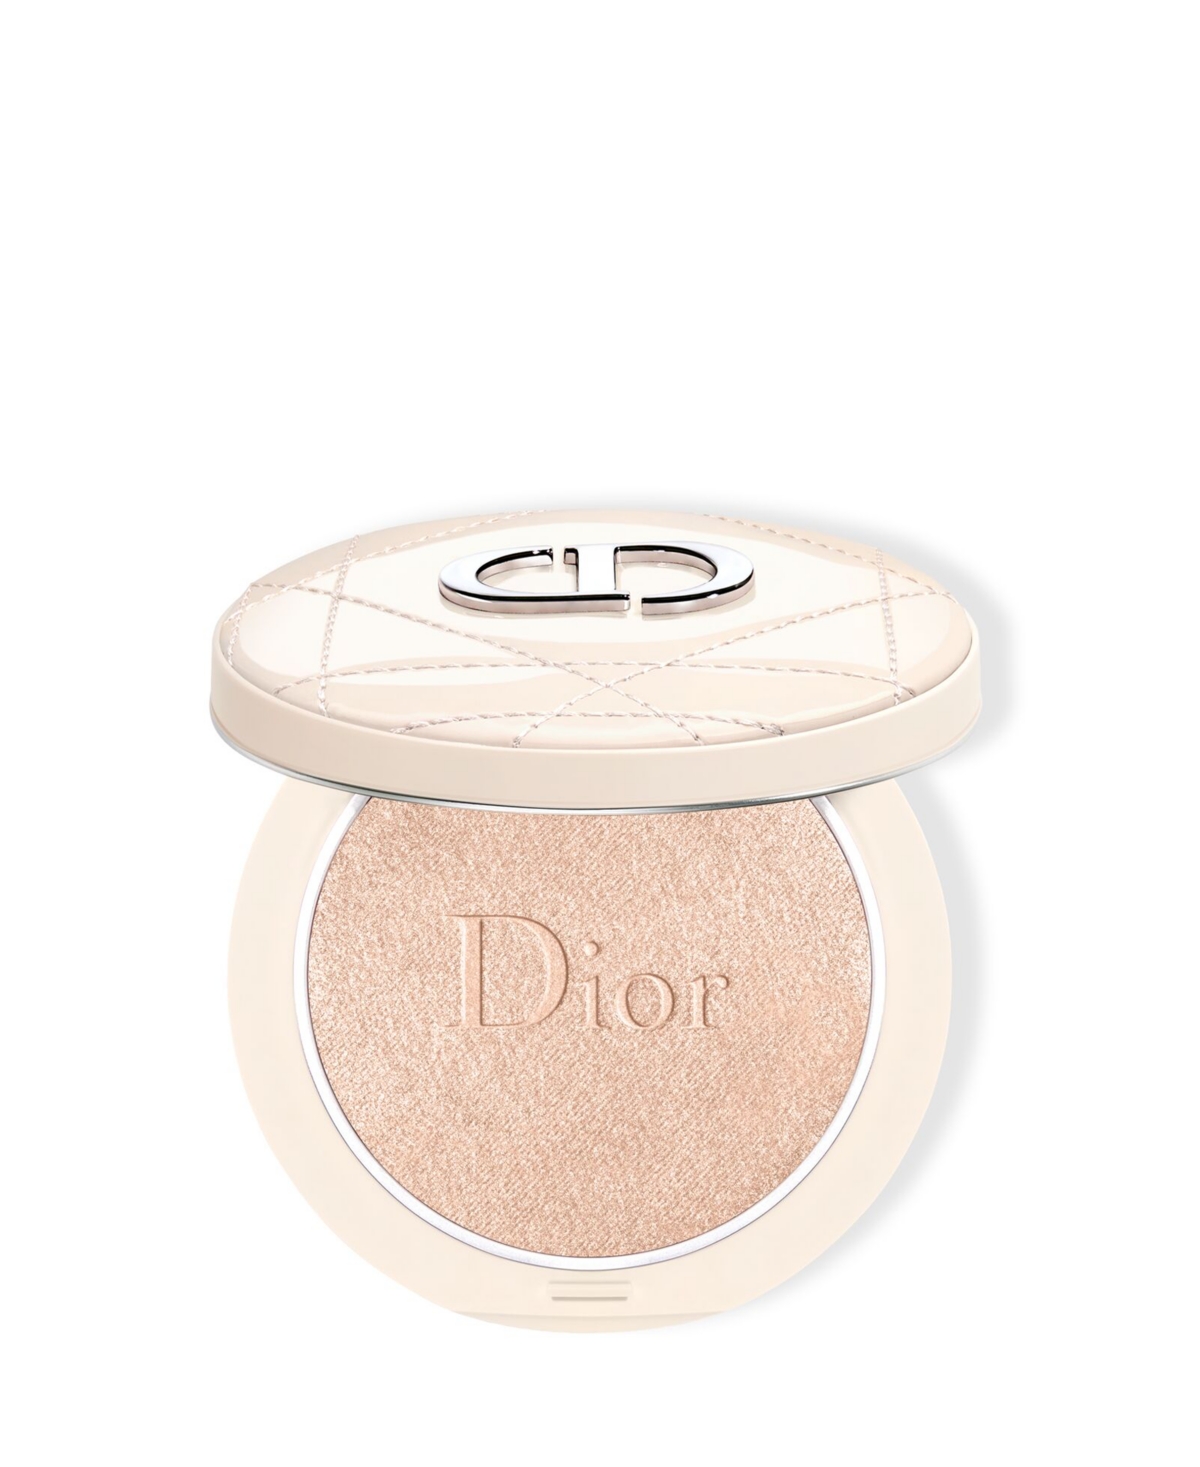 Dior Forever Couture Luminizer Highlighter Powder In Nude Glow